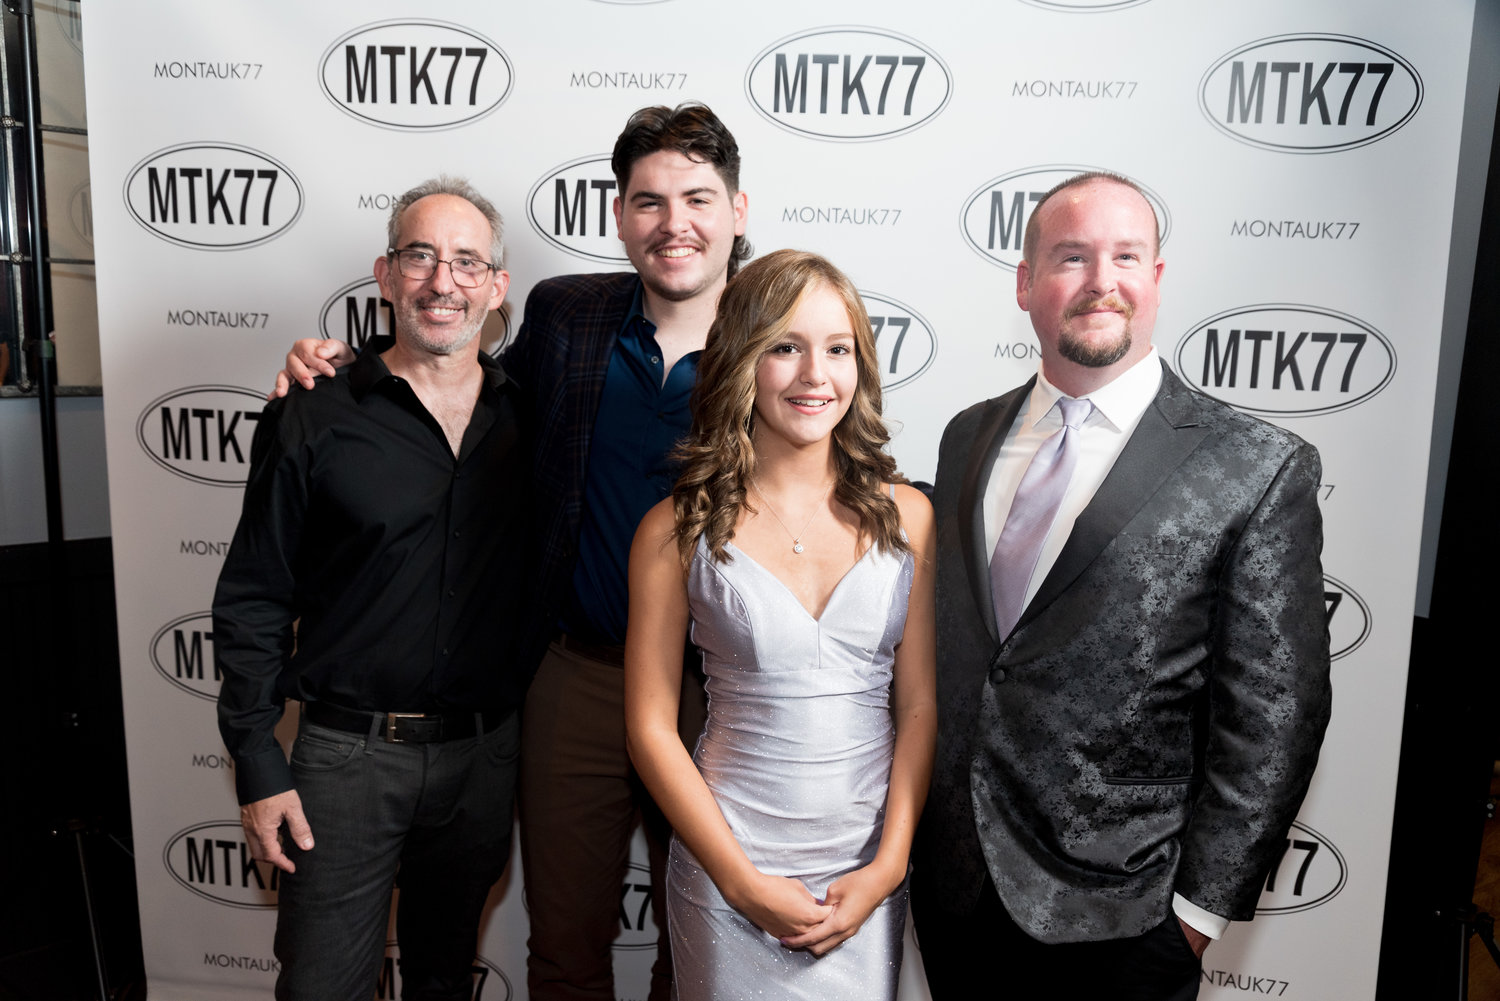 Ethan Kornfeld, Gavin Williams, Michayla Scully and Michael Scully at one of Montauk77’s premieres.